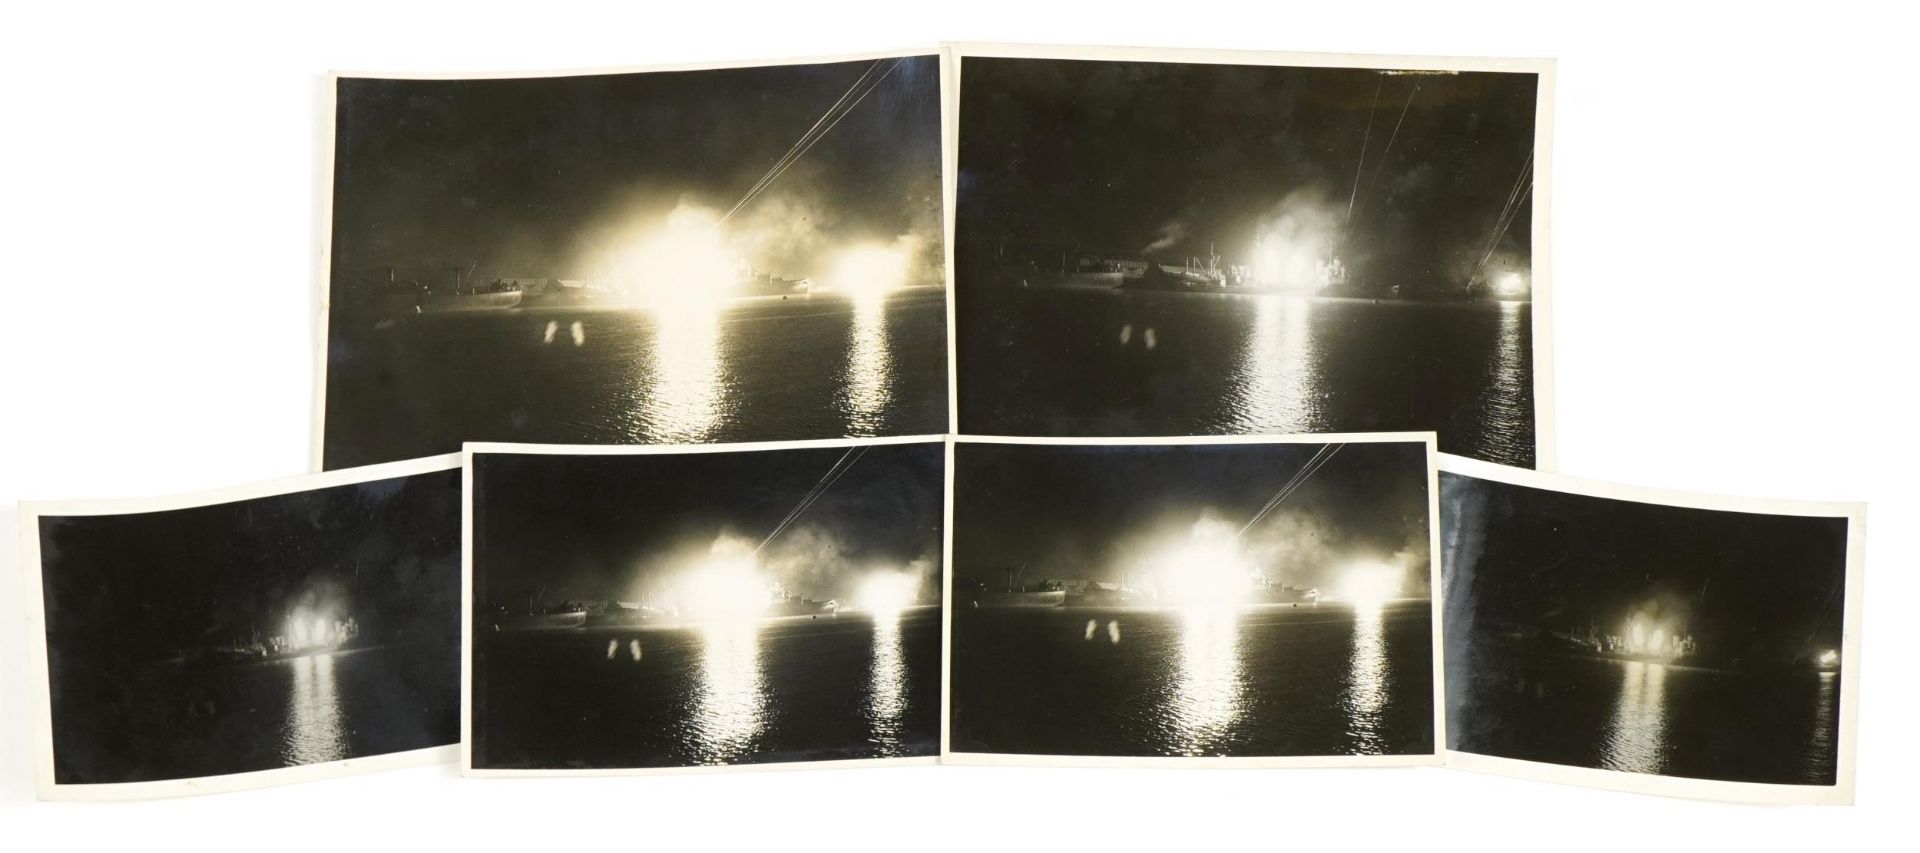 Six British military World War II naval photographs of ship explosions, each with Ministry of